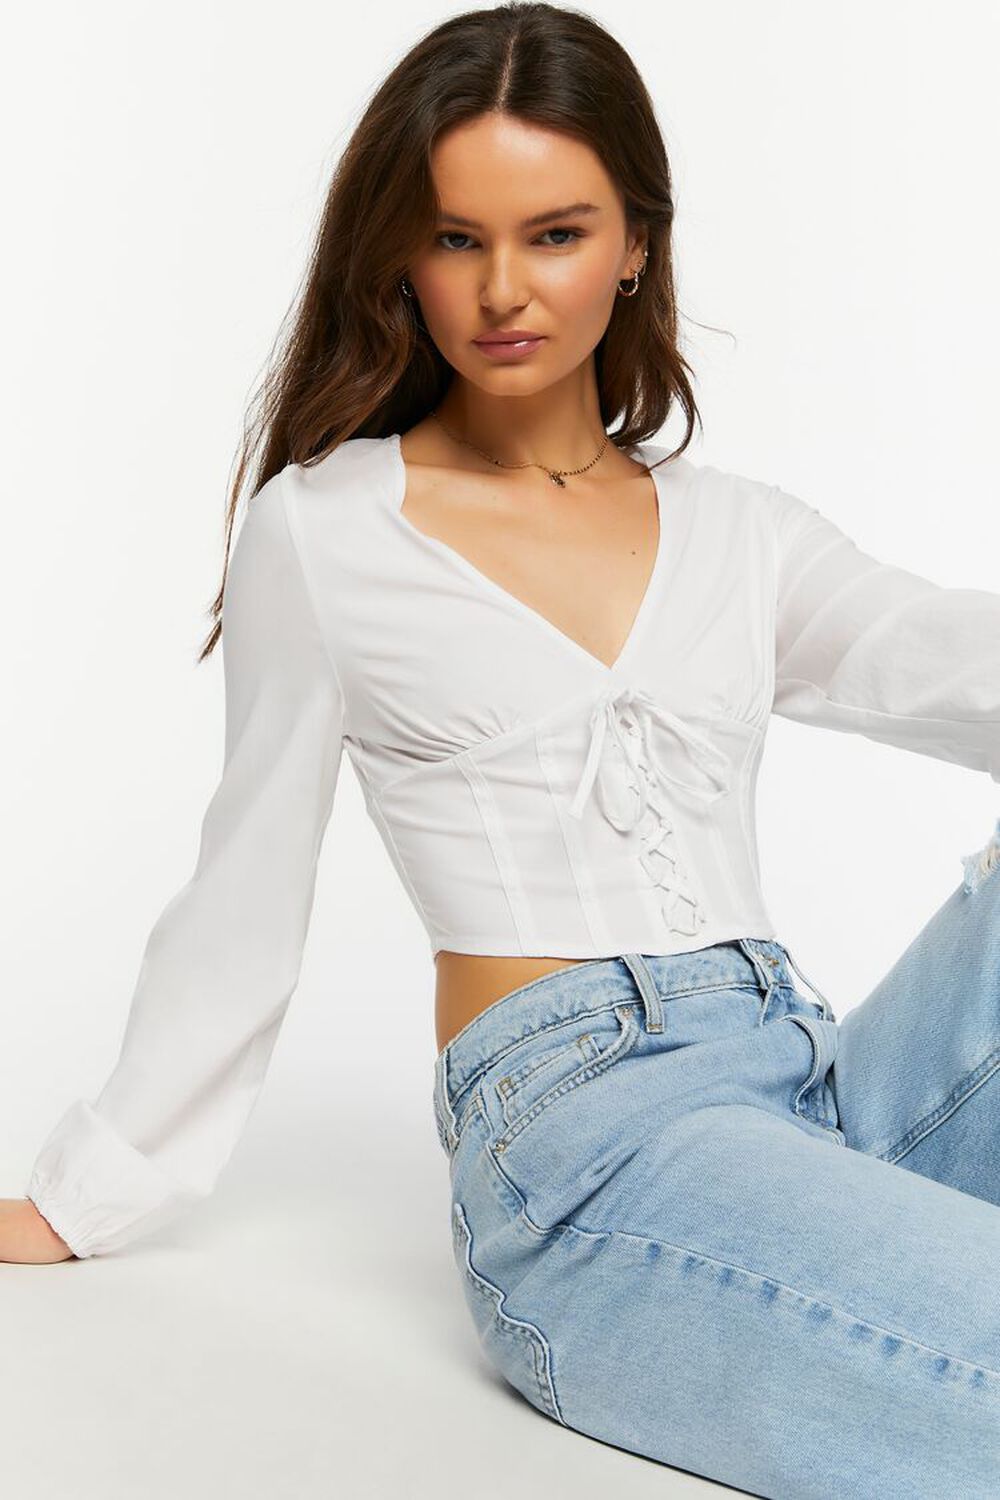 WHITE Lace-Up Seamed Crop Top, image 1